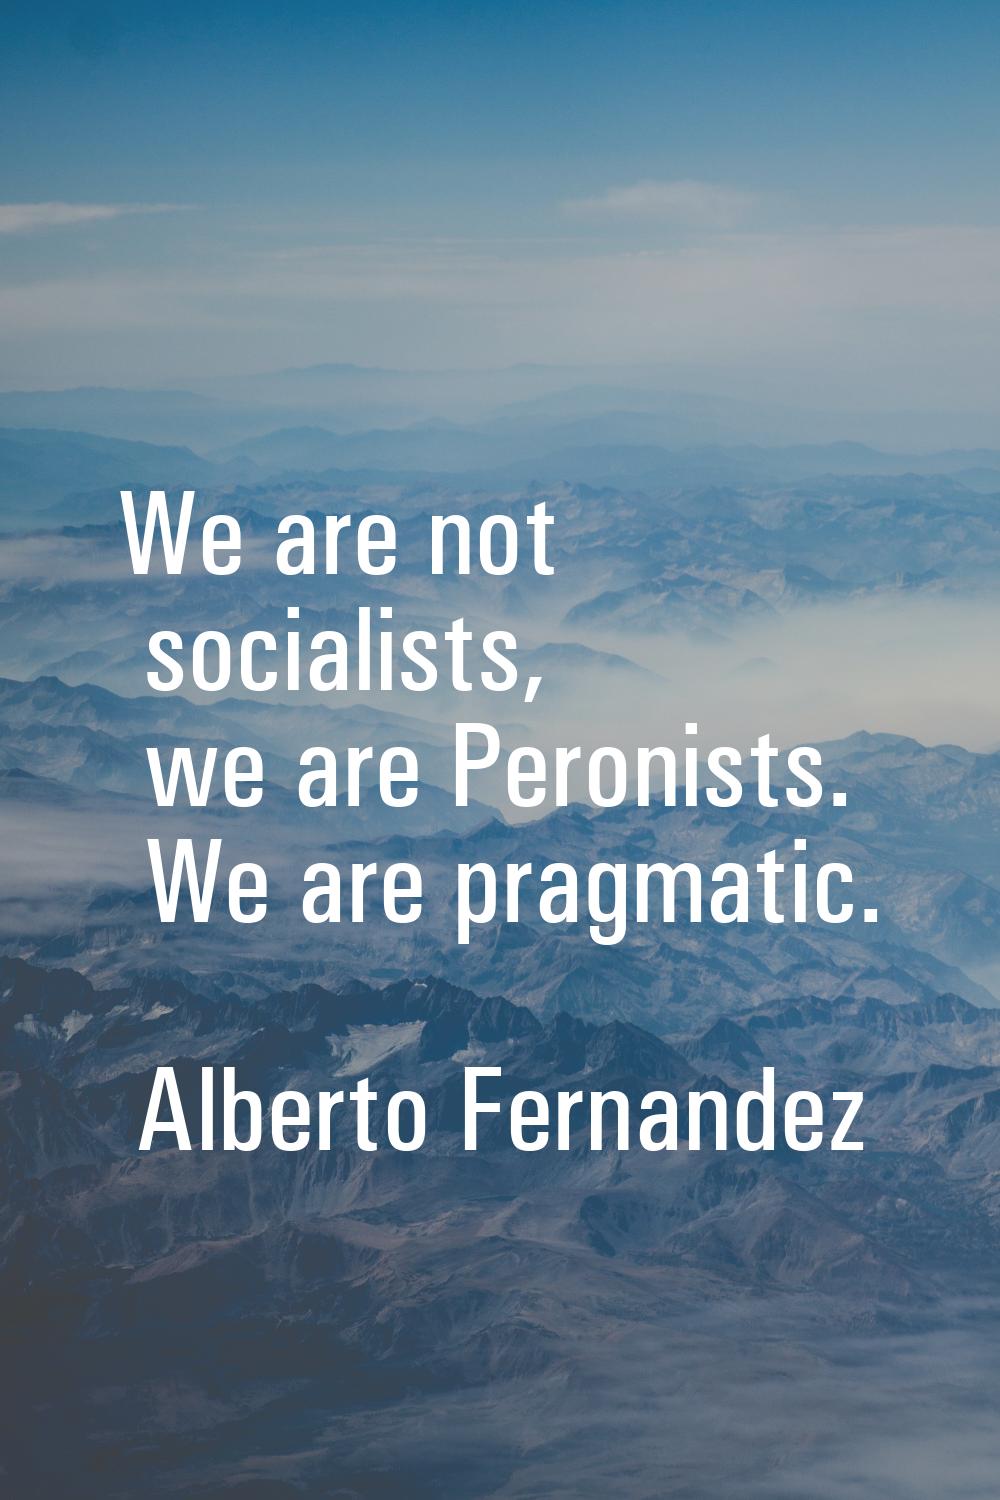 We are not socialists, we are Peronists. We are pragmatic.